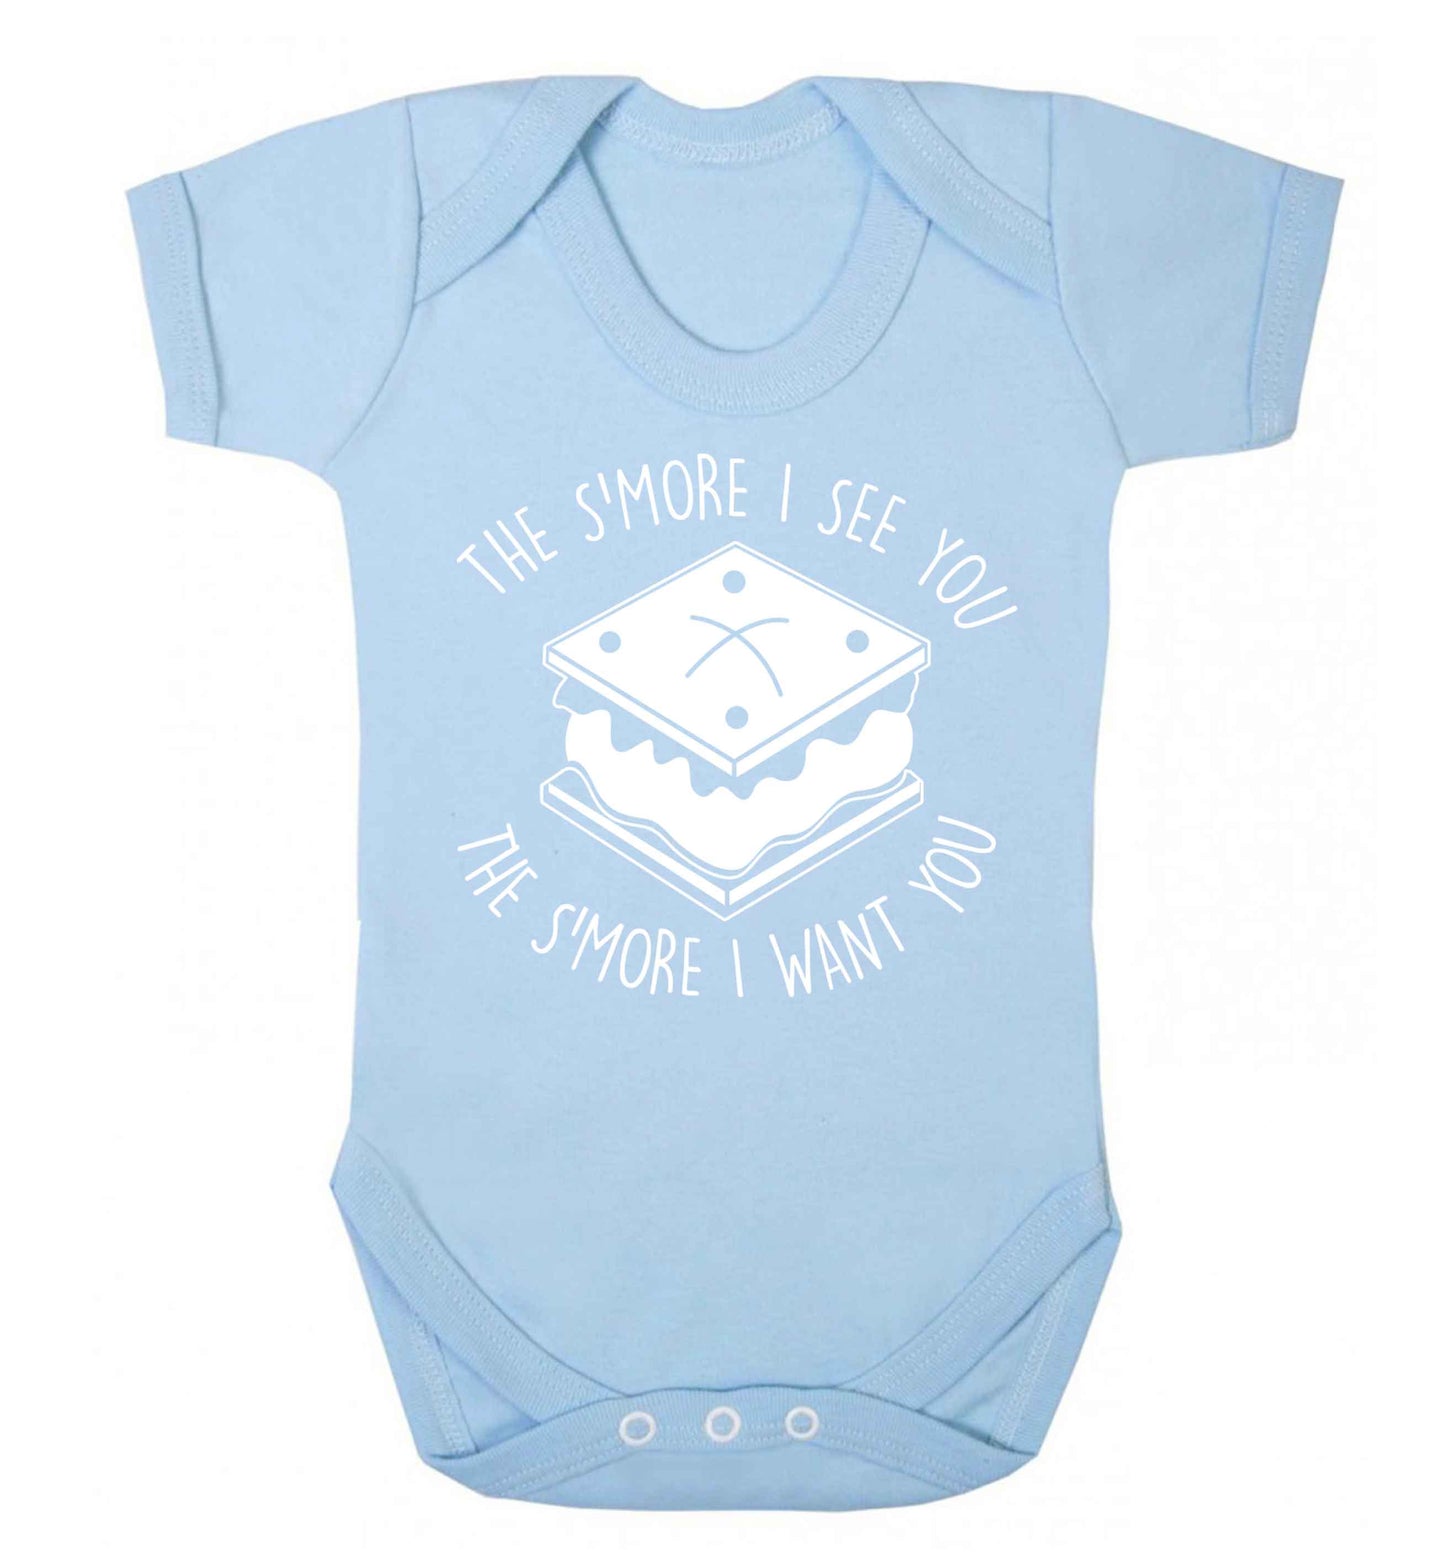 The s'more I see you the s'more I want you Baby Vest pale blue 18-24 months